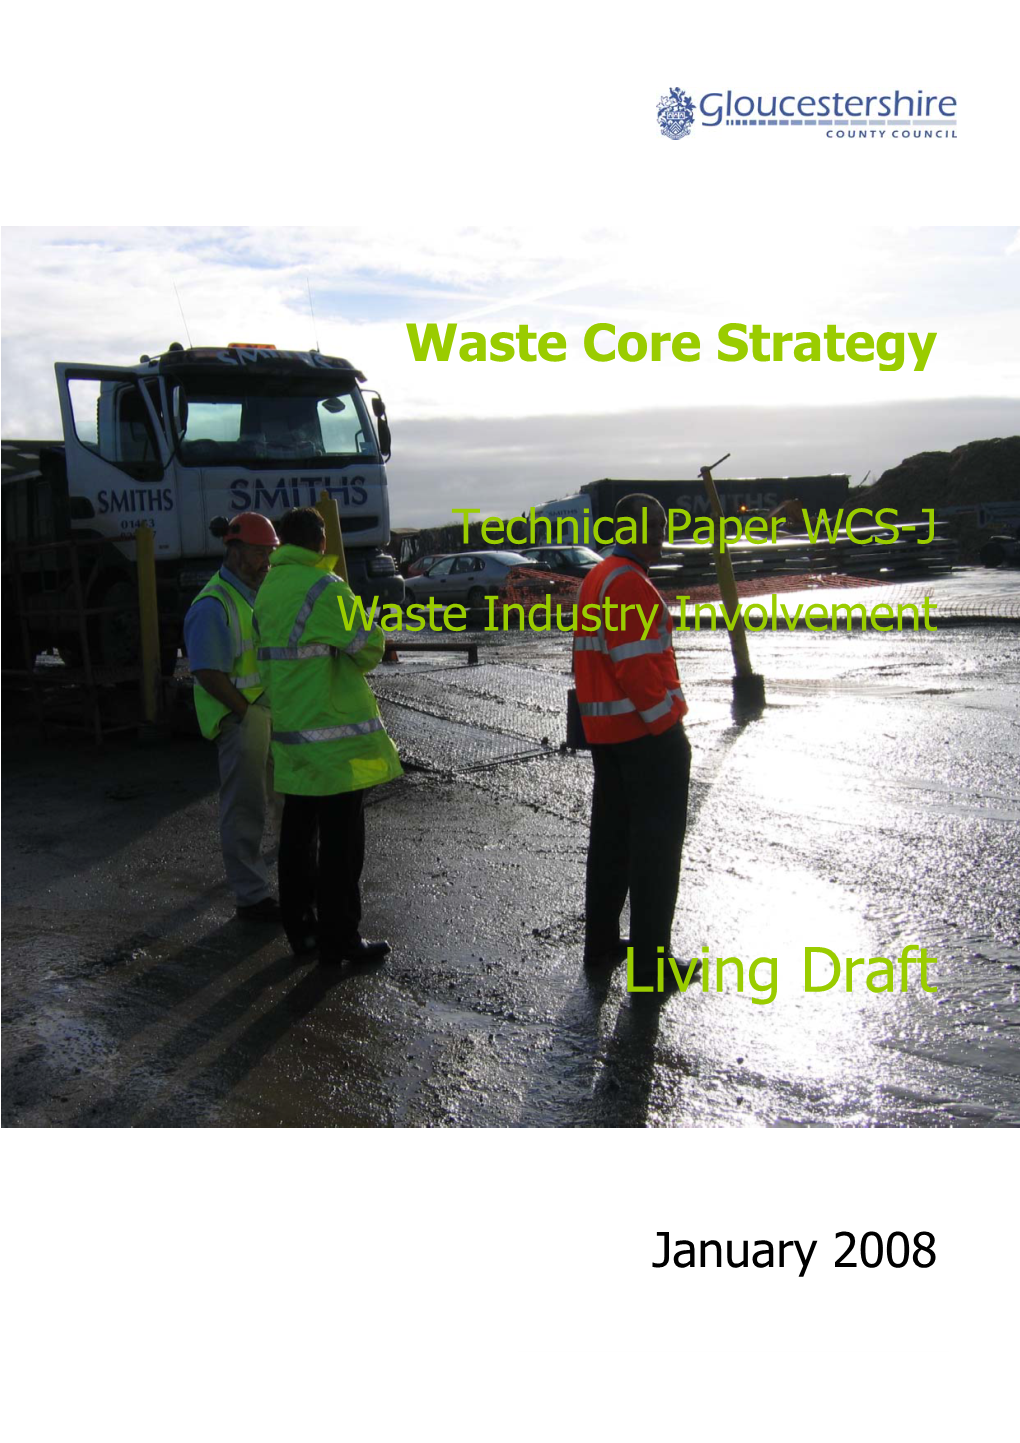 Technical Paper WCS-J Waste Industry Involvement